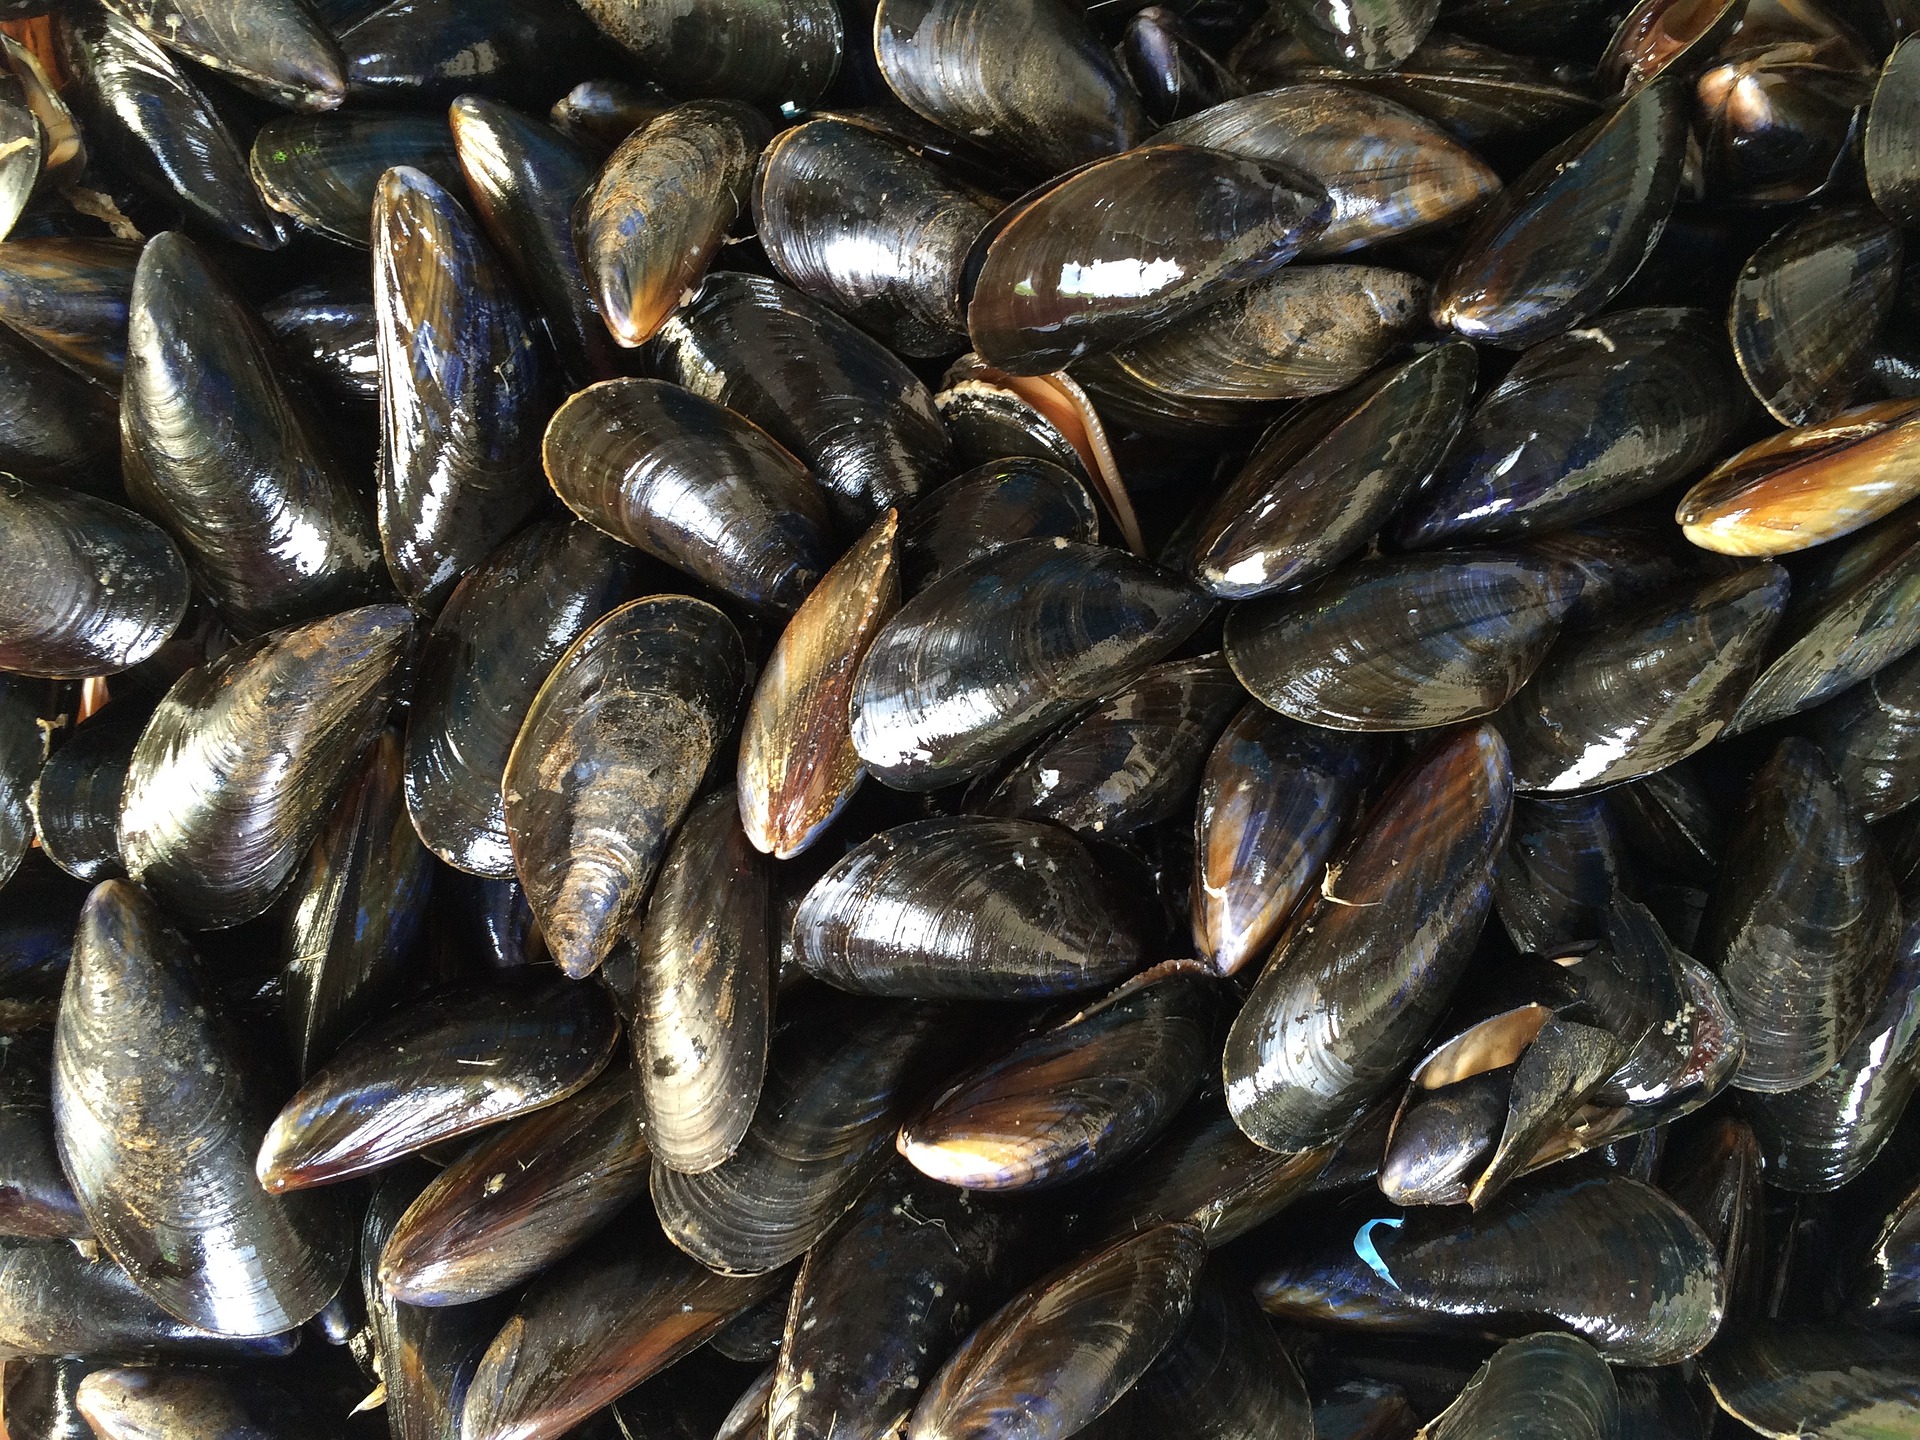 Any of various marine bivalve mollusks that attach to hard surfaces in intertidal areas with byssal threads, especially the edible members of the family Mytilidae and in particular Mytilus edulis, a blue-black species of the North Atlantic Ocean, raised commercially for food - image via pixabay.